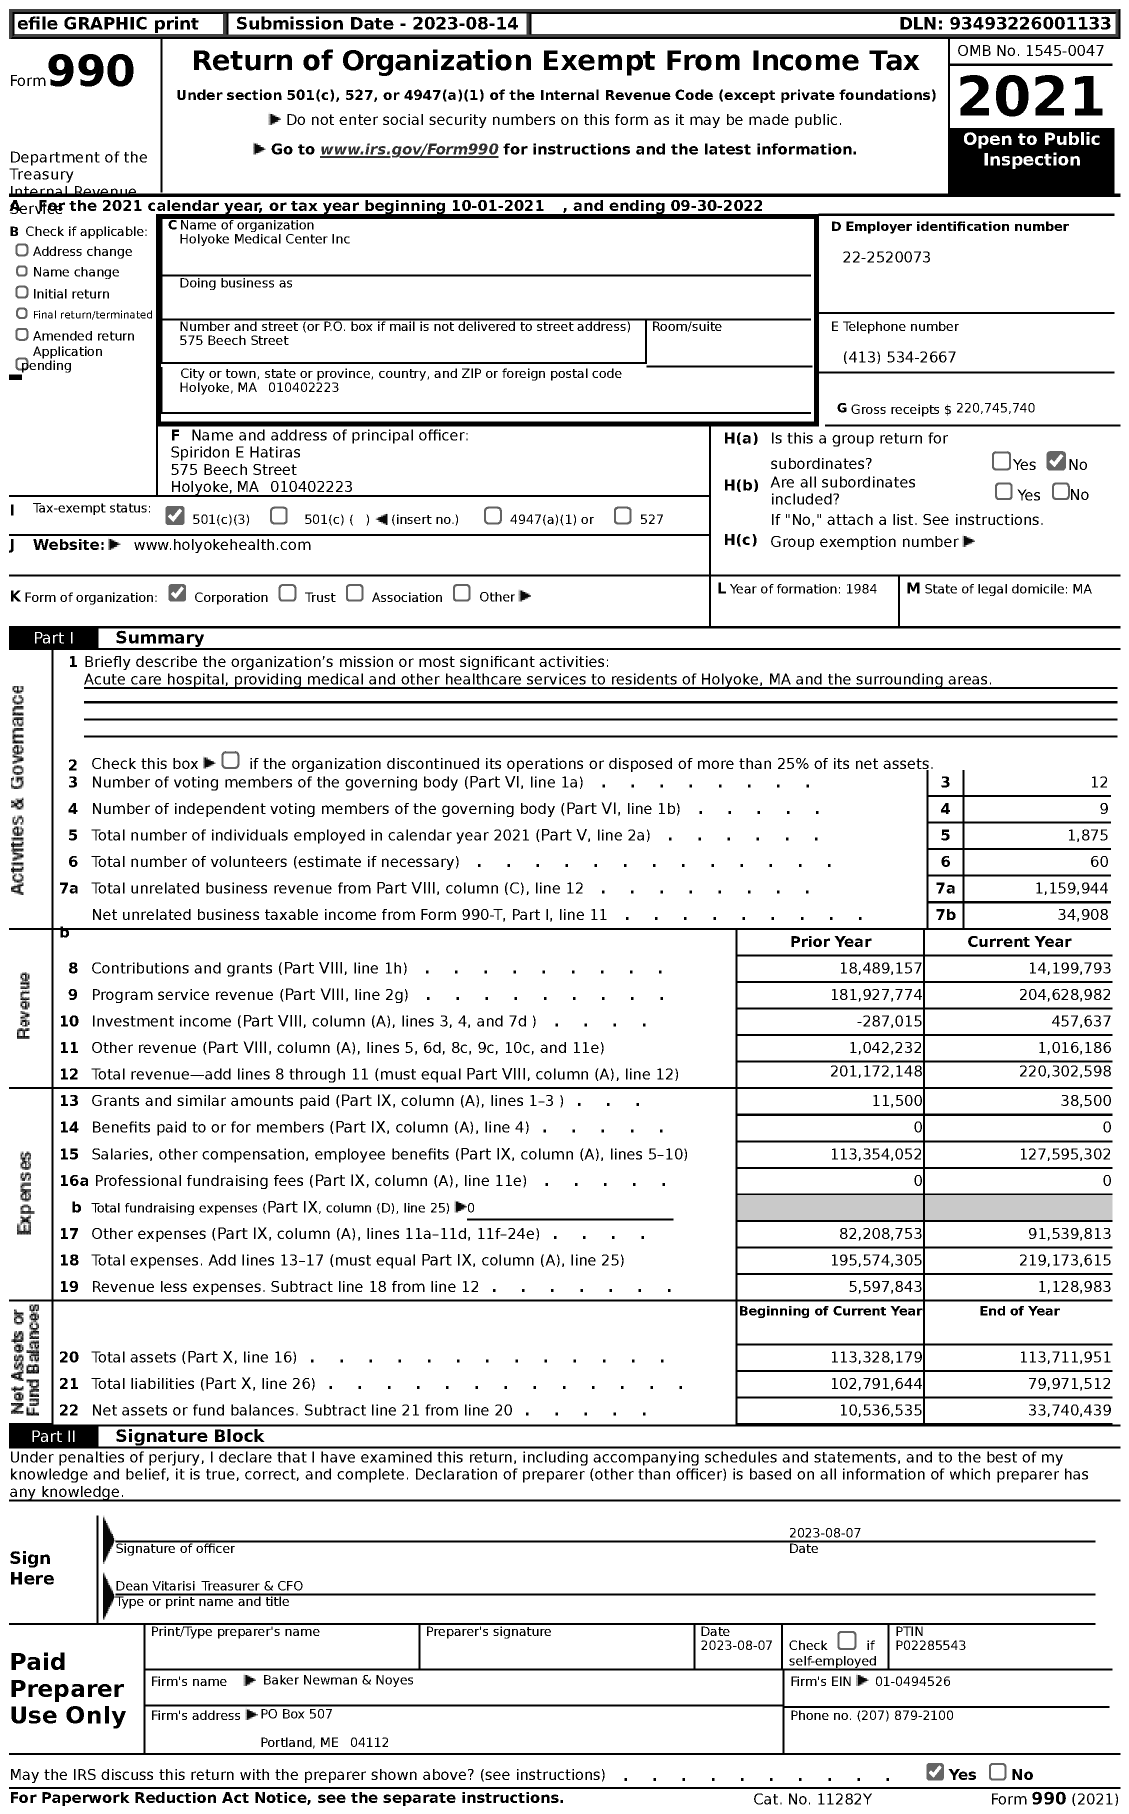 Image of first page of 2021 Form 990 for Holyoke Medical Center (HMC)